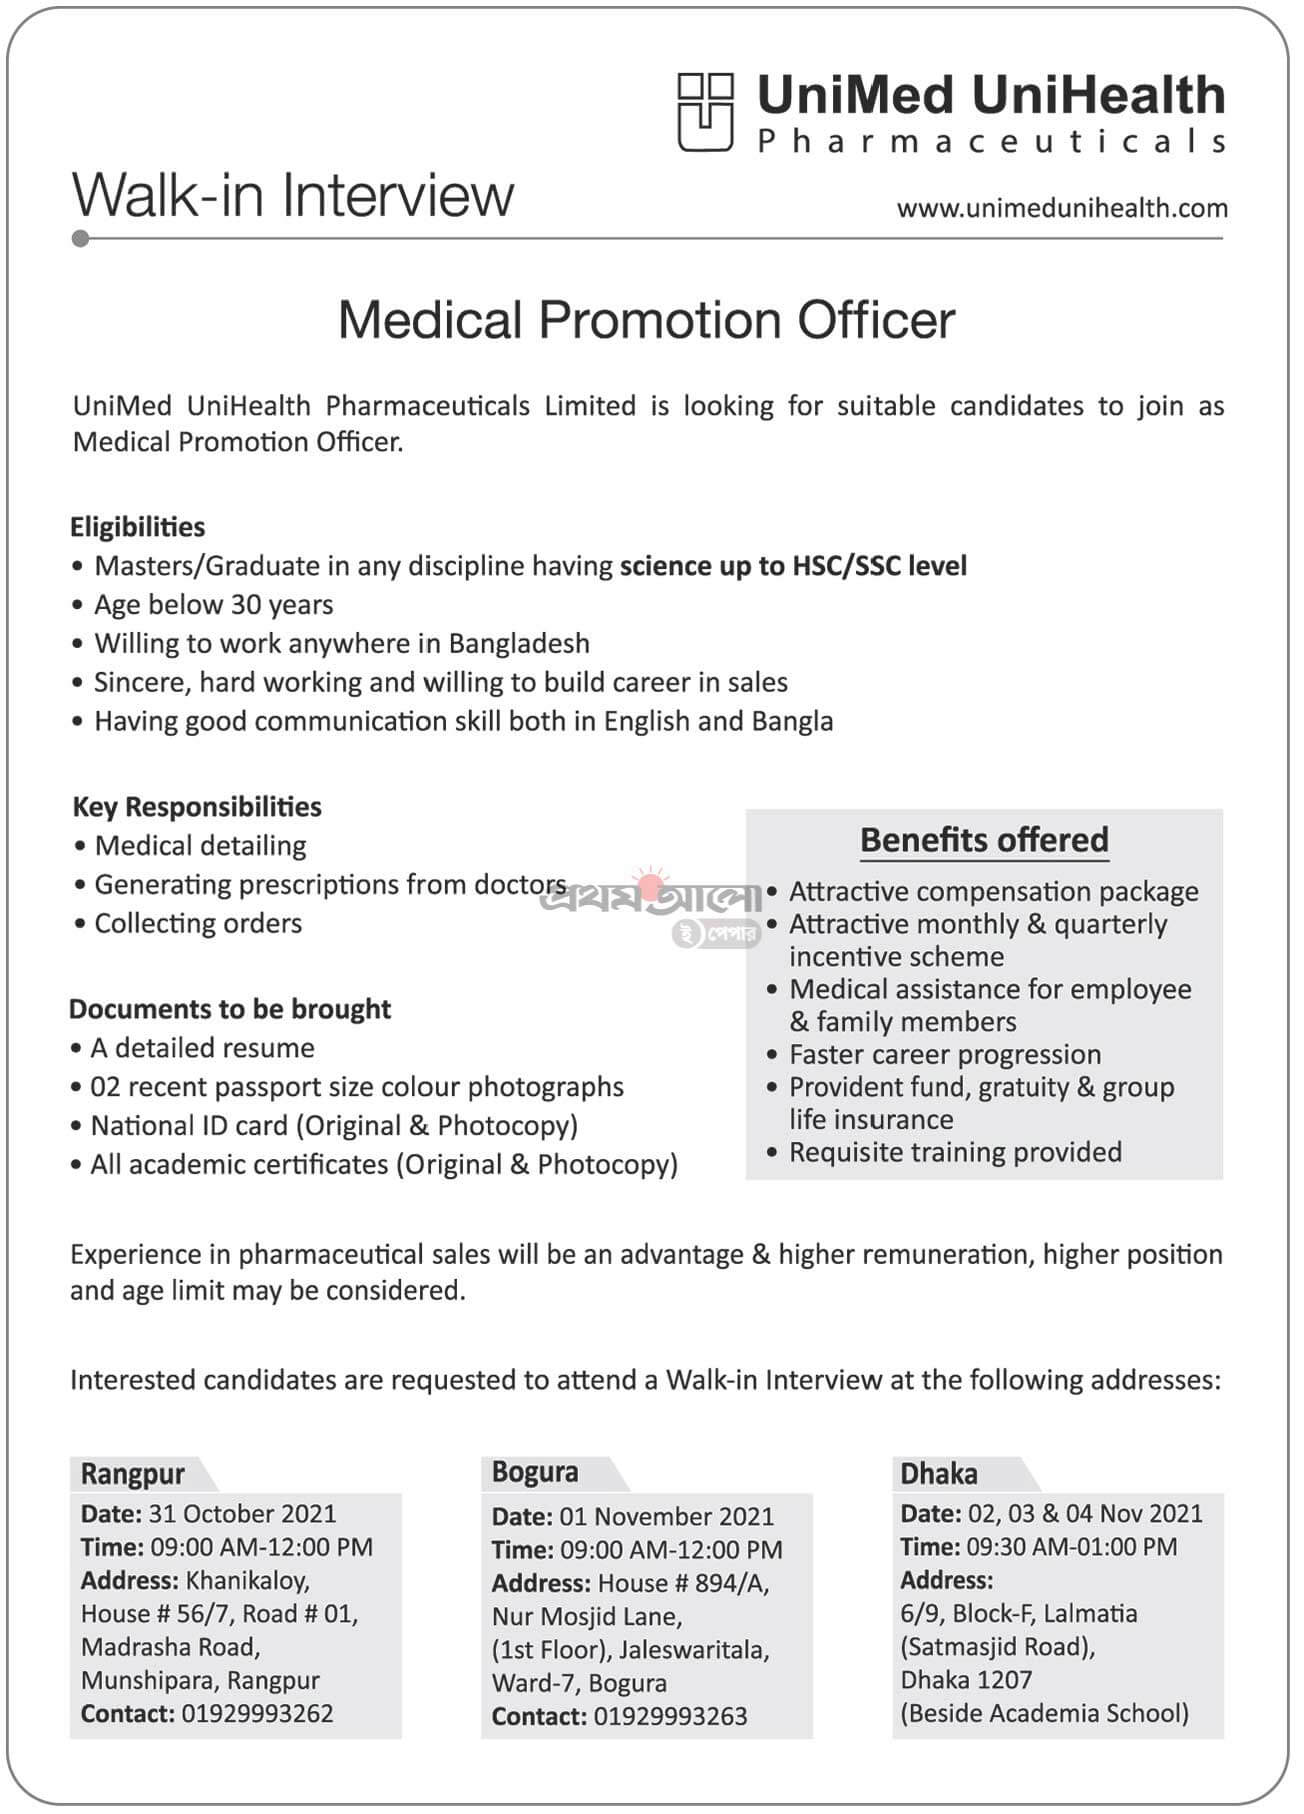 UniMed UniHealth Pharmaceuticals Limited Job Circular image 2021 Apply